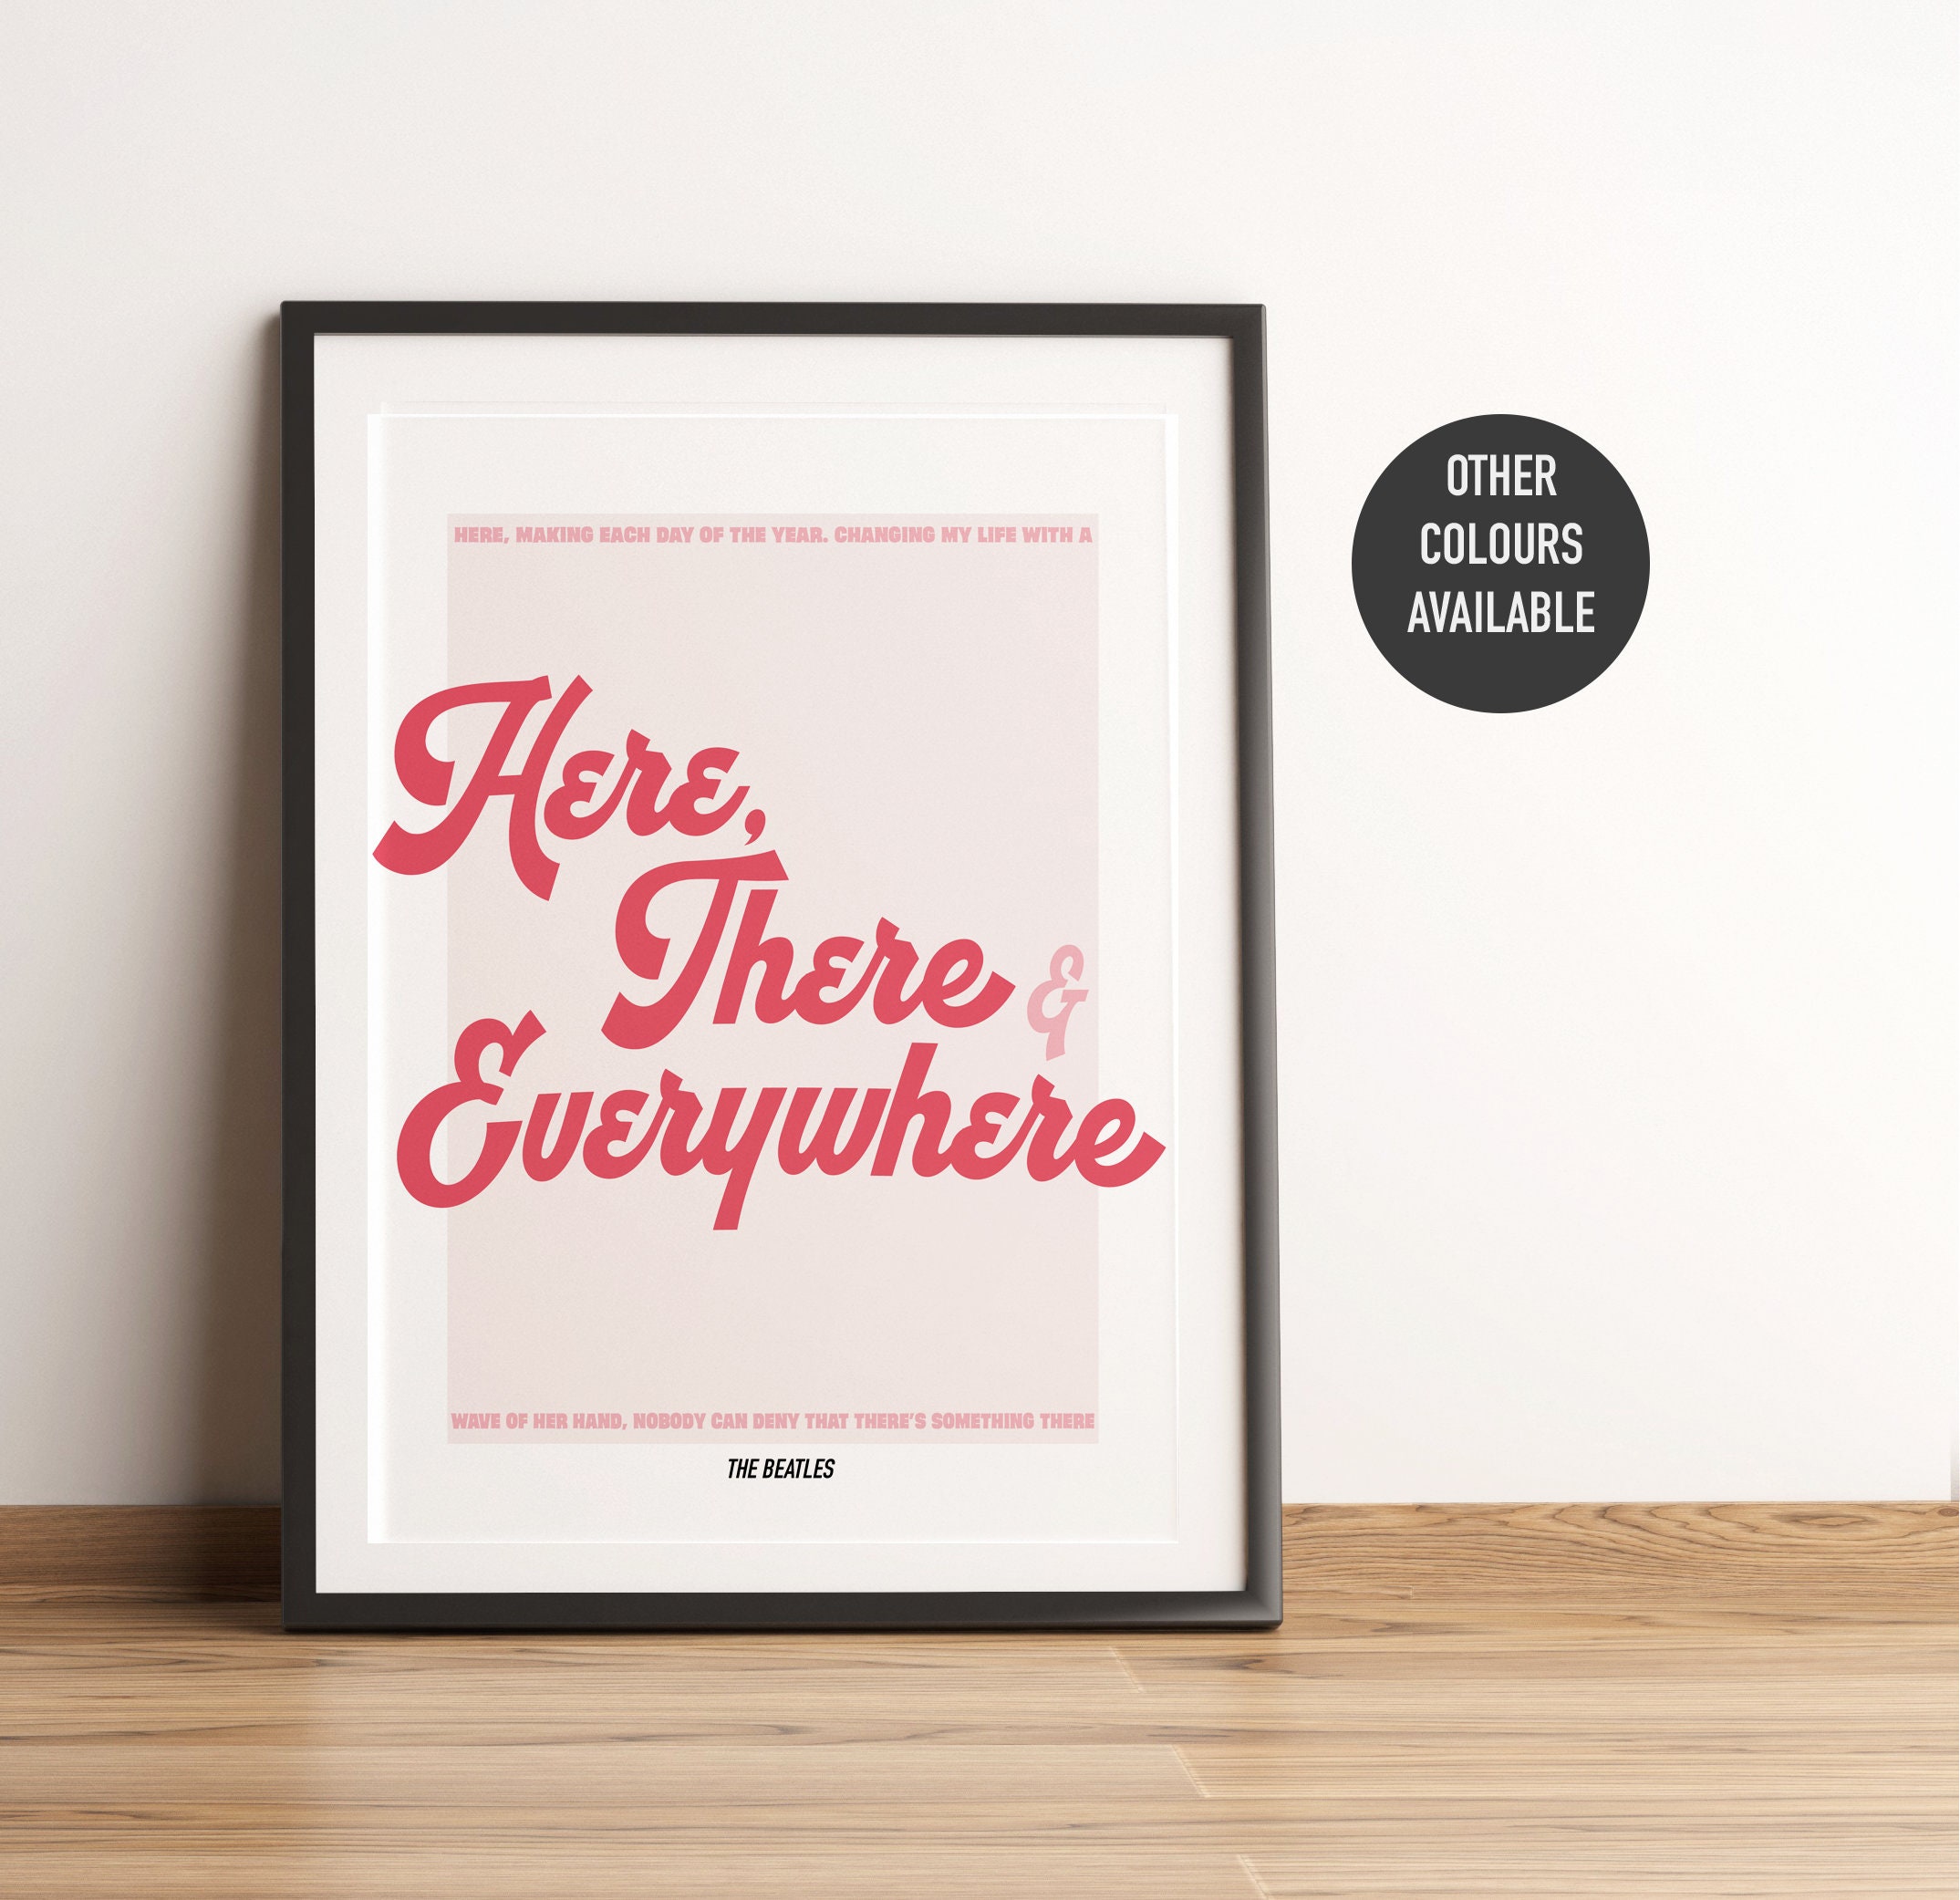 Here There and Everywhere Beatles Lyrics Hand-lettered 